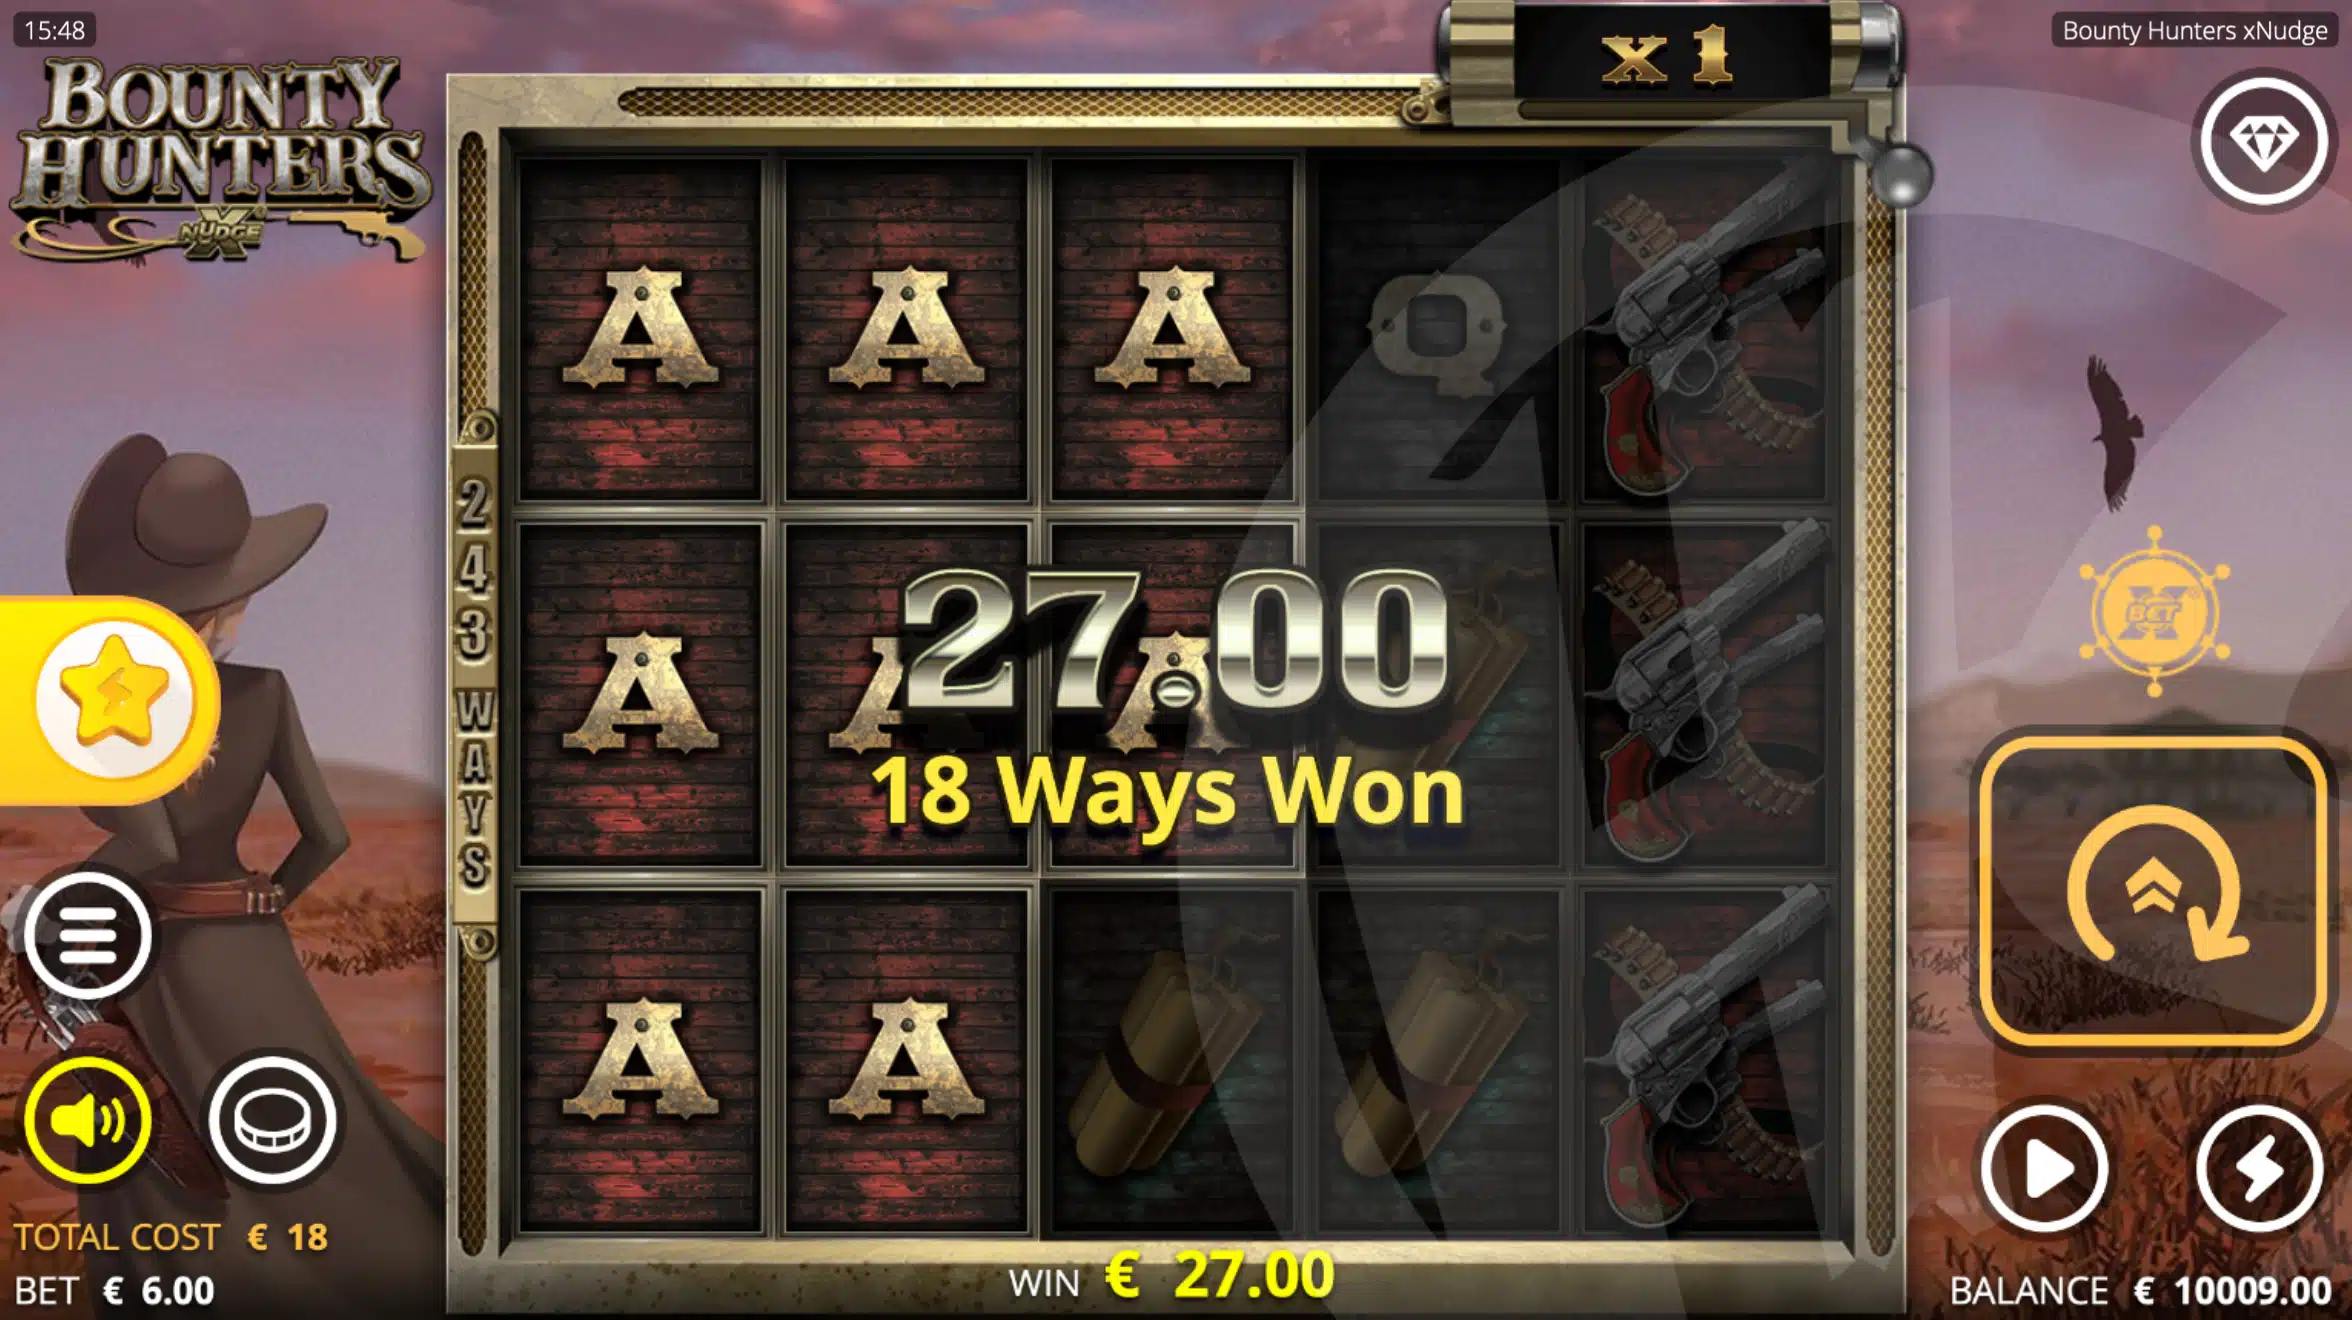 Bounty Hunters Offers Players 243 Ways to Win